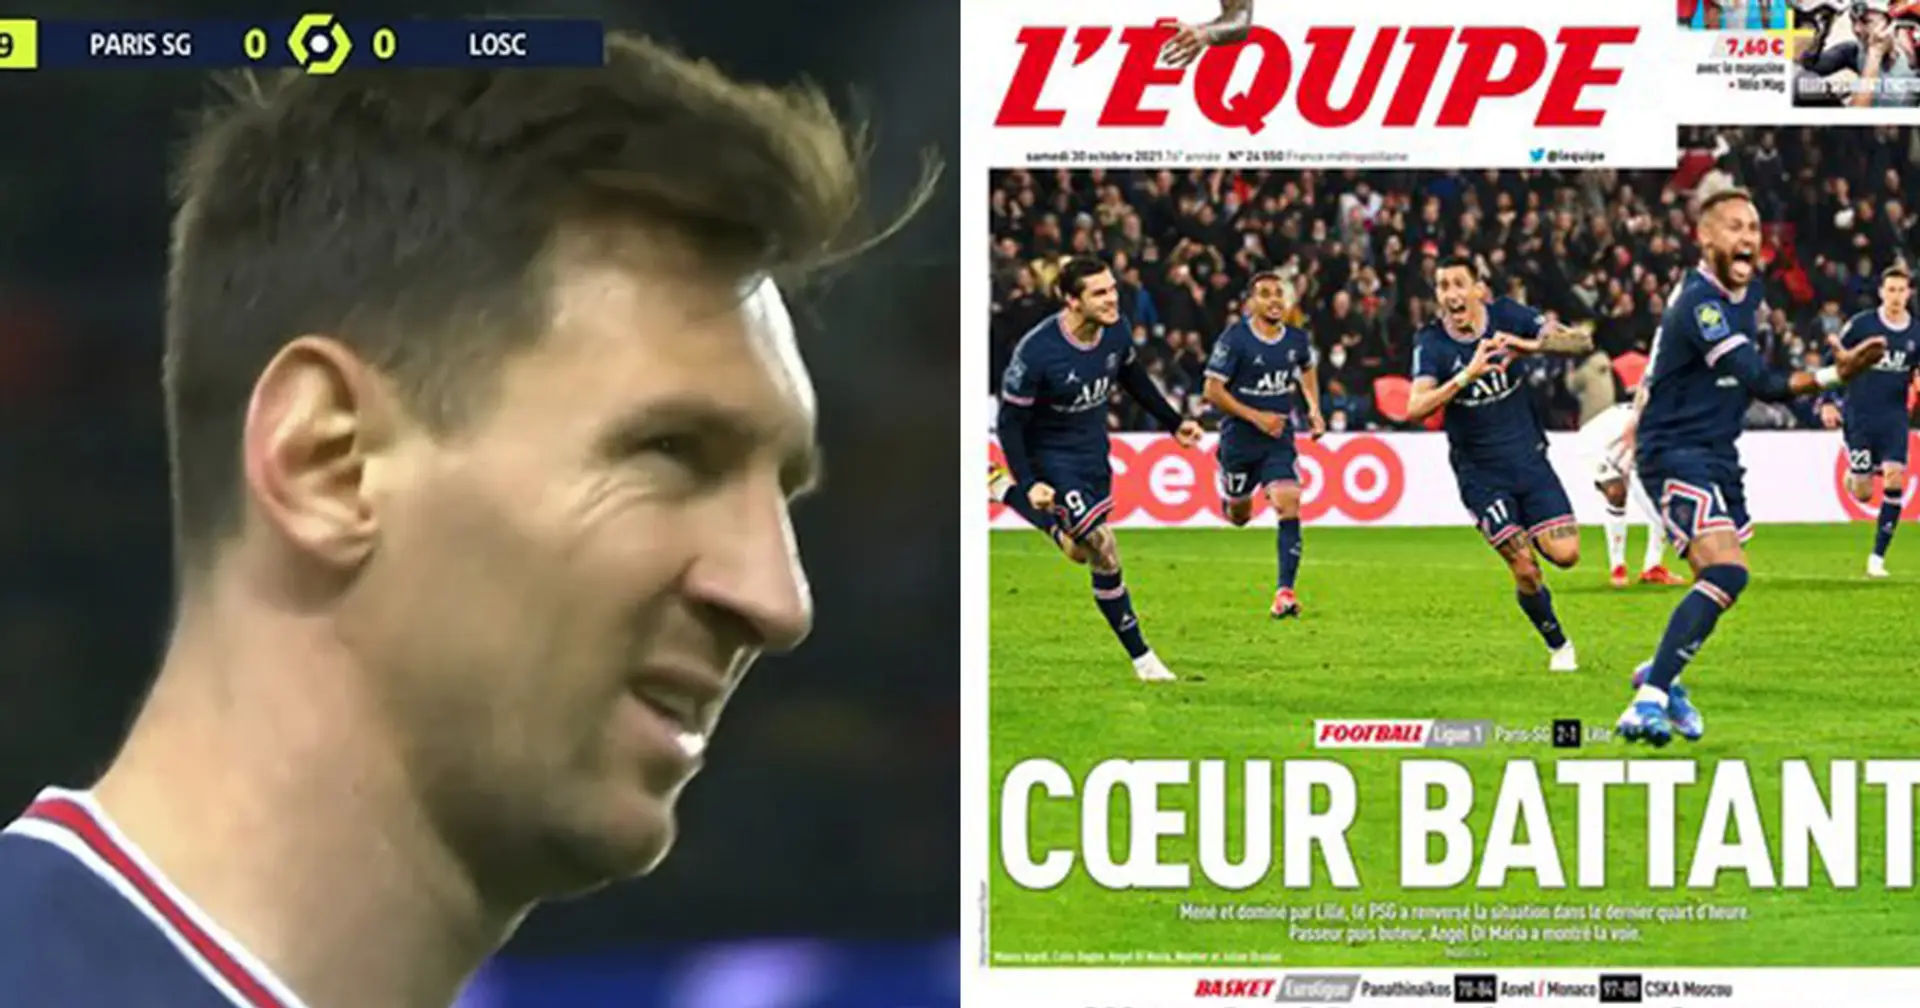 L'Equipe assess Messi's Lille performance at 3/10 – worst among PSG players